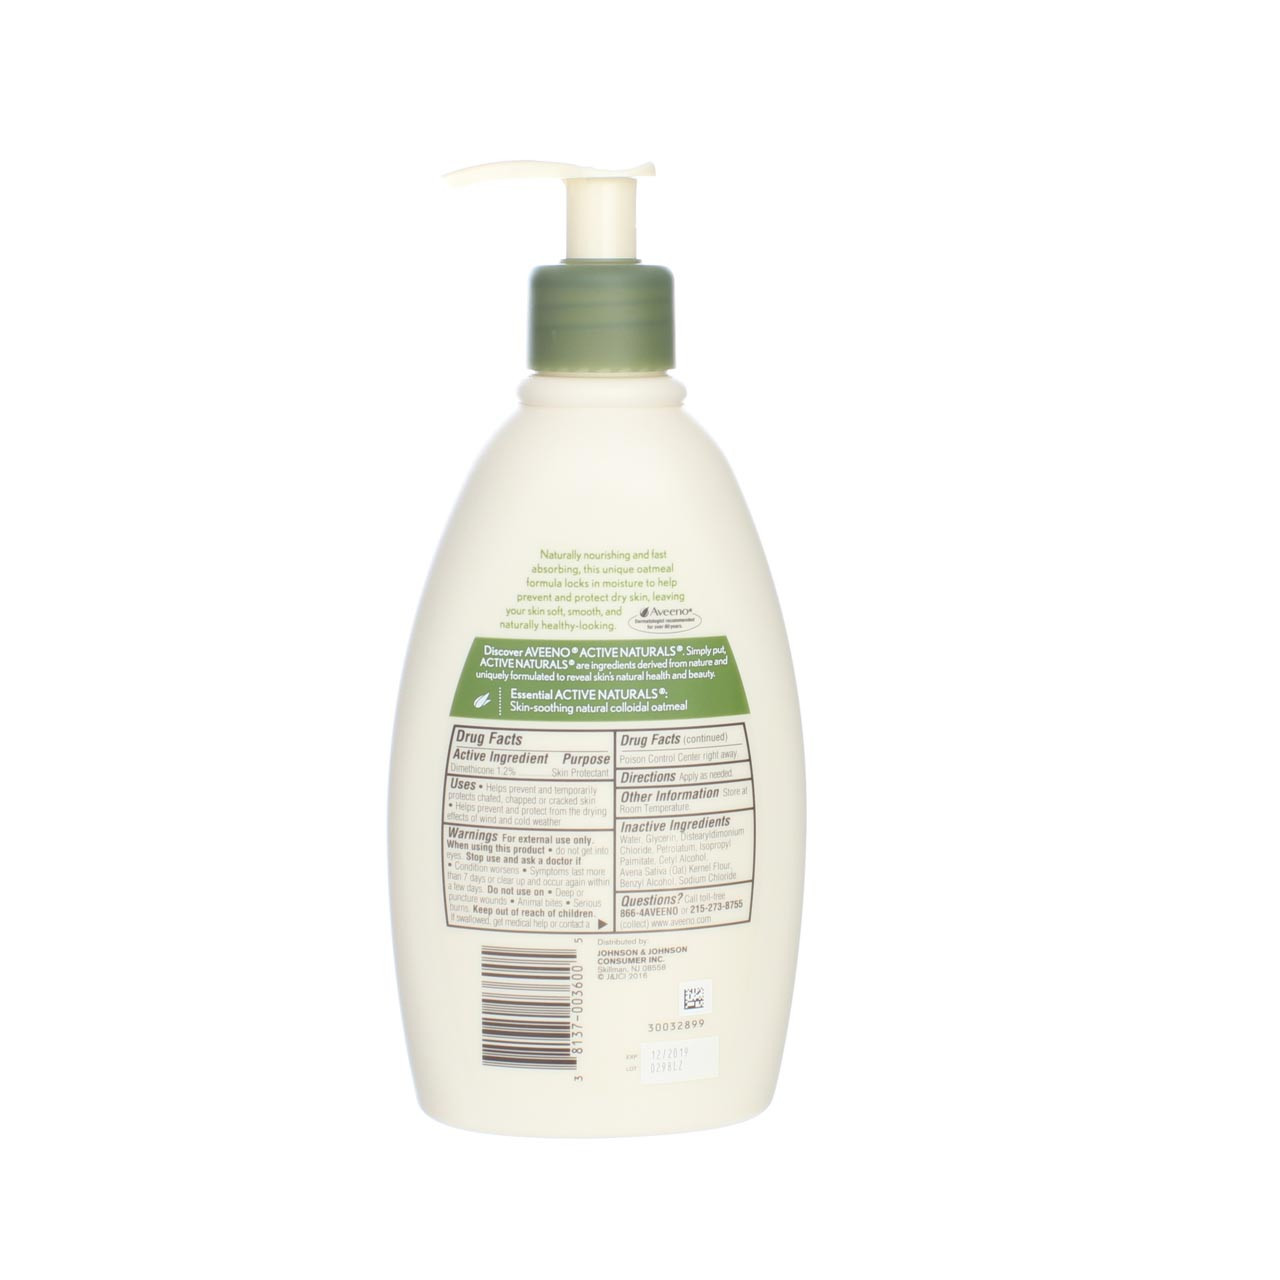 AVEENO Active Naturals Daily Moisturizing Lotion, Fragrance Free 12 oz (Pack of 2) - image 3 of 6